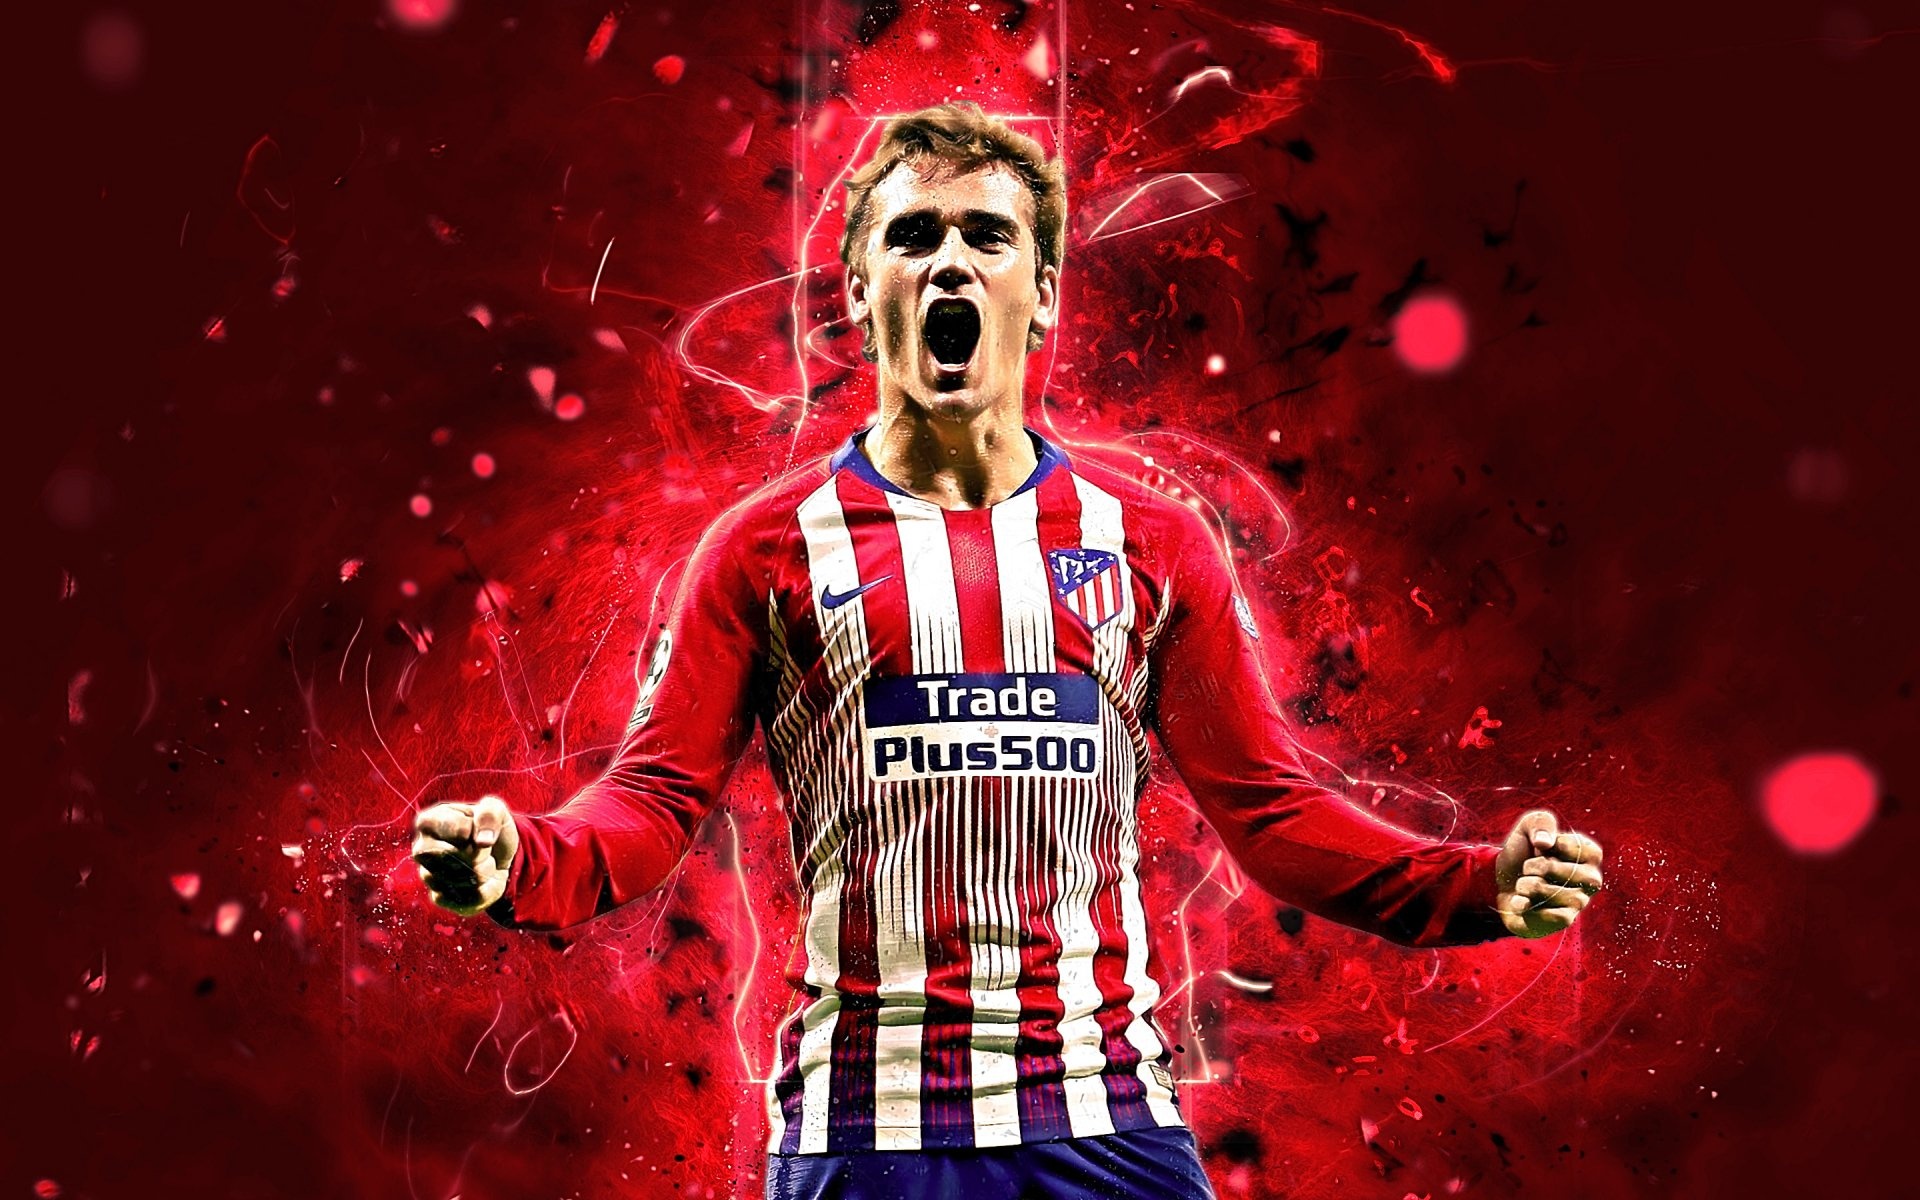 Atletico Madrid: The club's home kit is red and white vertical striped shirts, blue shorts, and blue and red socks. 1920x1200 HD Background.